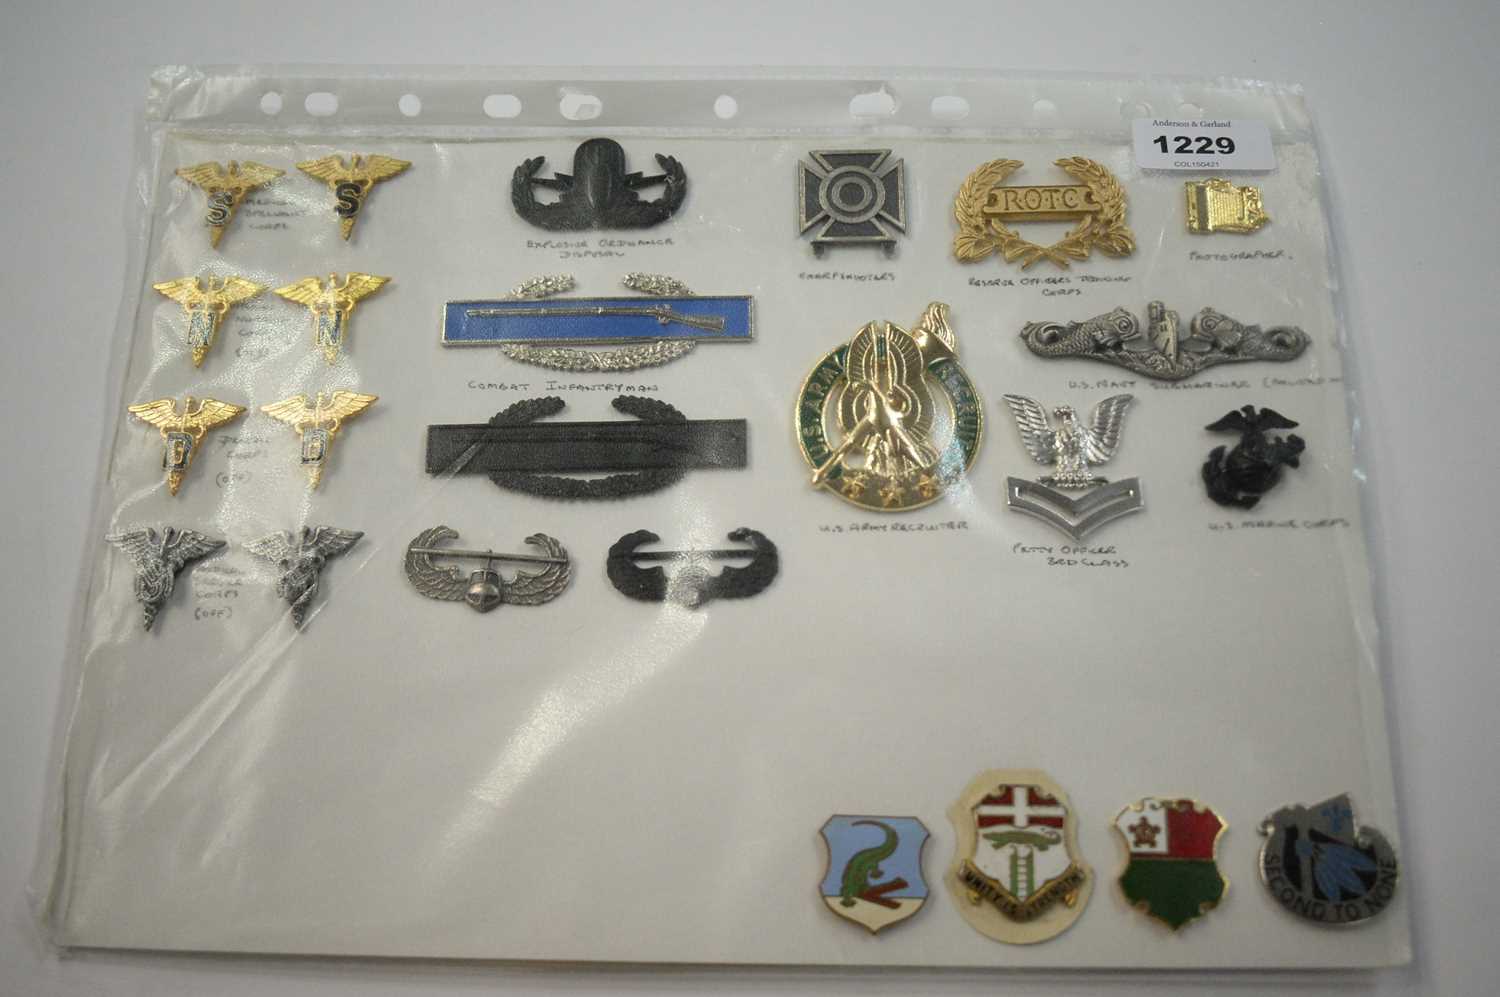 Lot 1229 - A collection of 24 American metal Insignia badges.